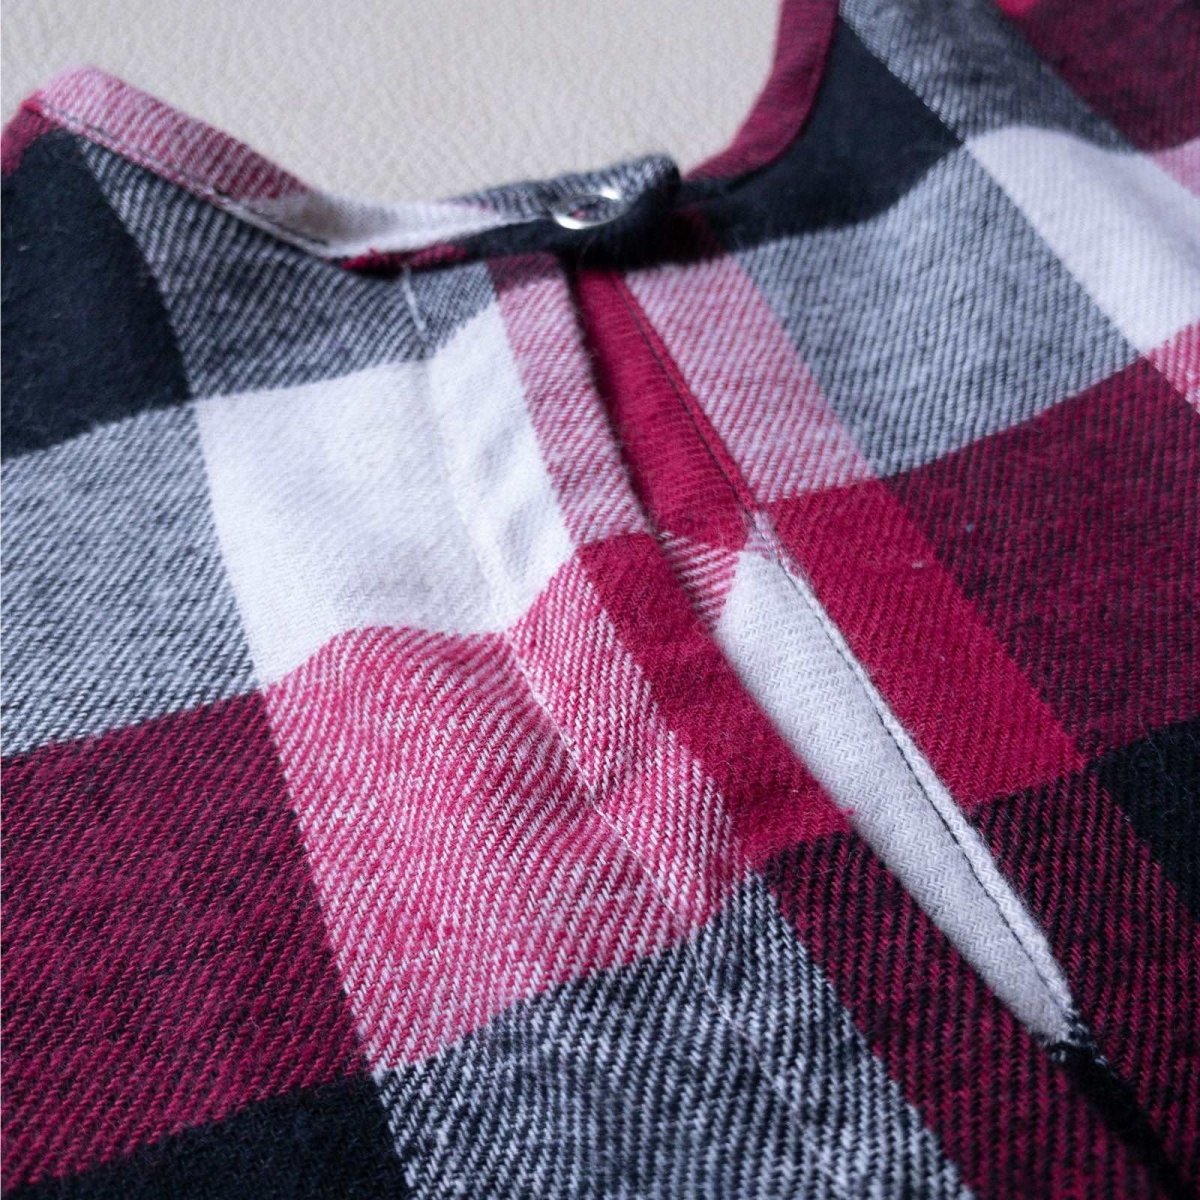 Cranberry Plaid Flannel Top - Beya MadeTOP